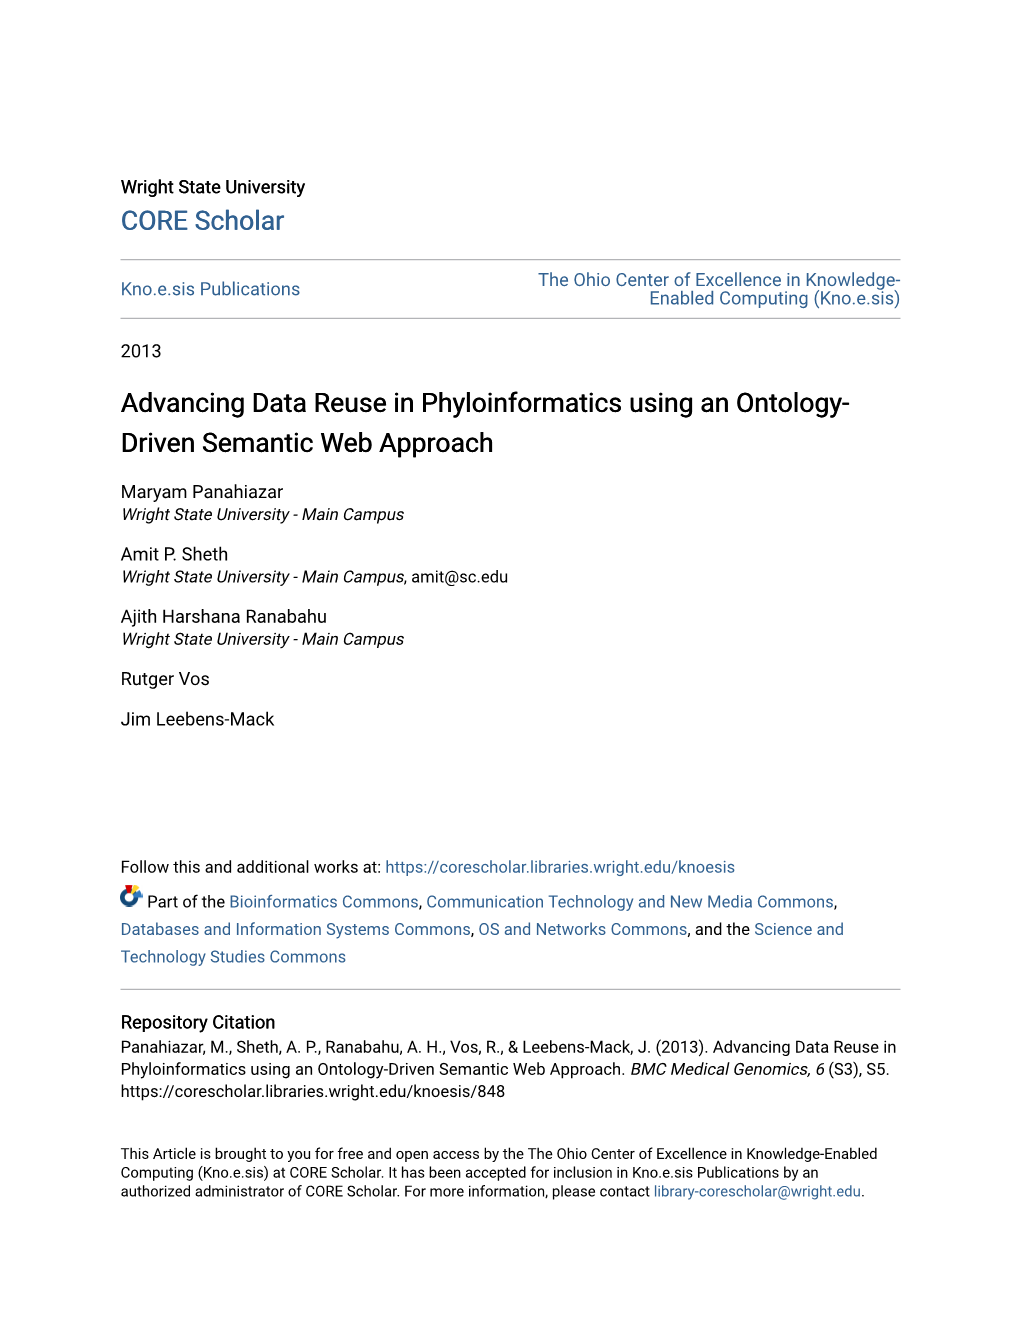 Advancing Data Reuse in Phyloinformatics Using an Ontology- Driven Semantic Web Approach